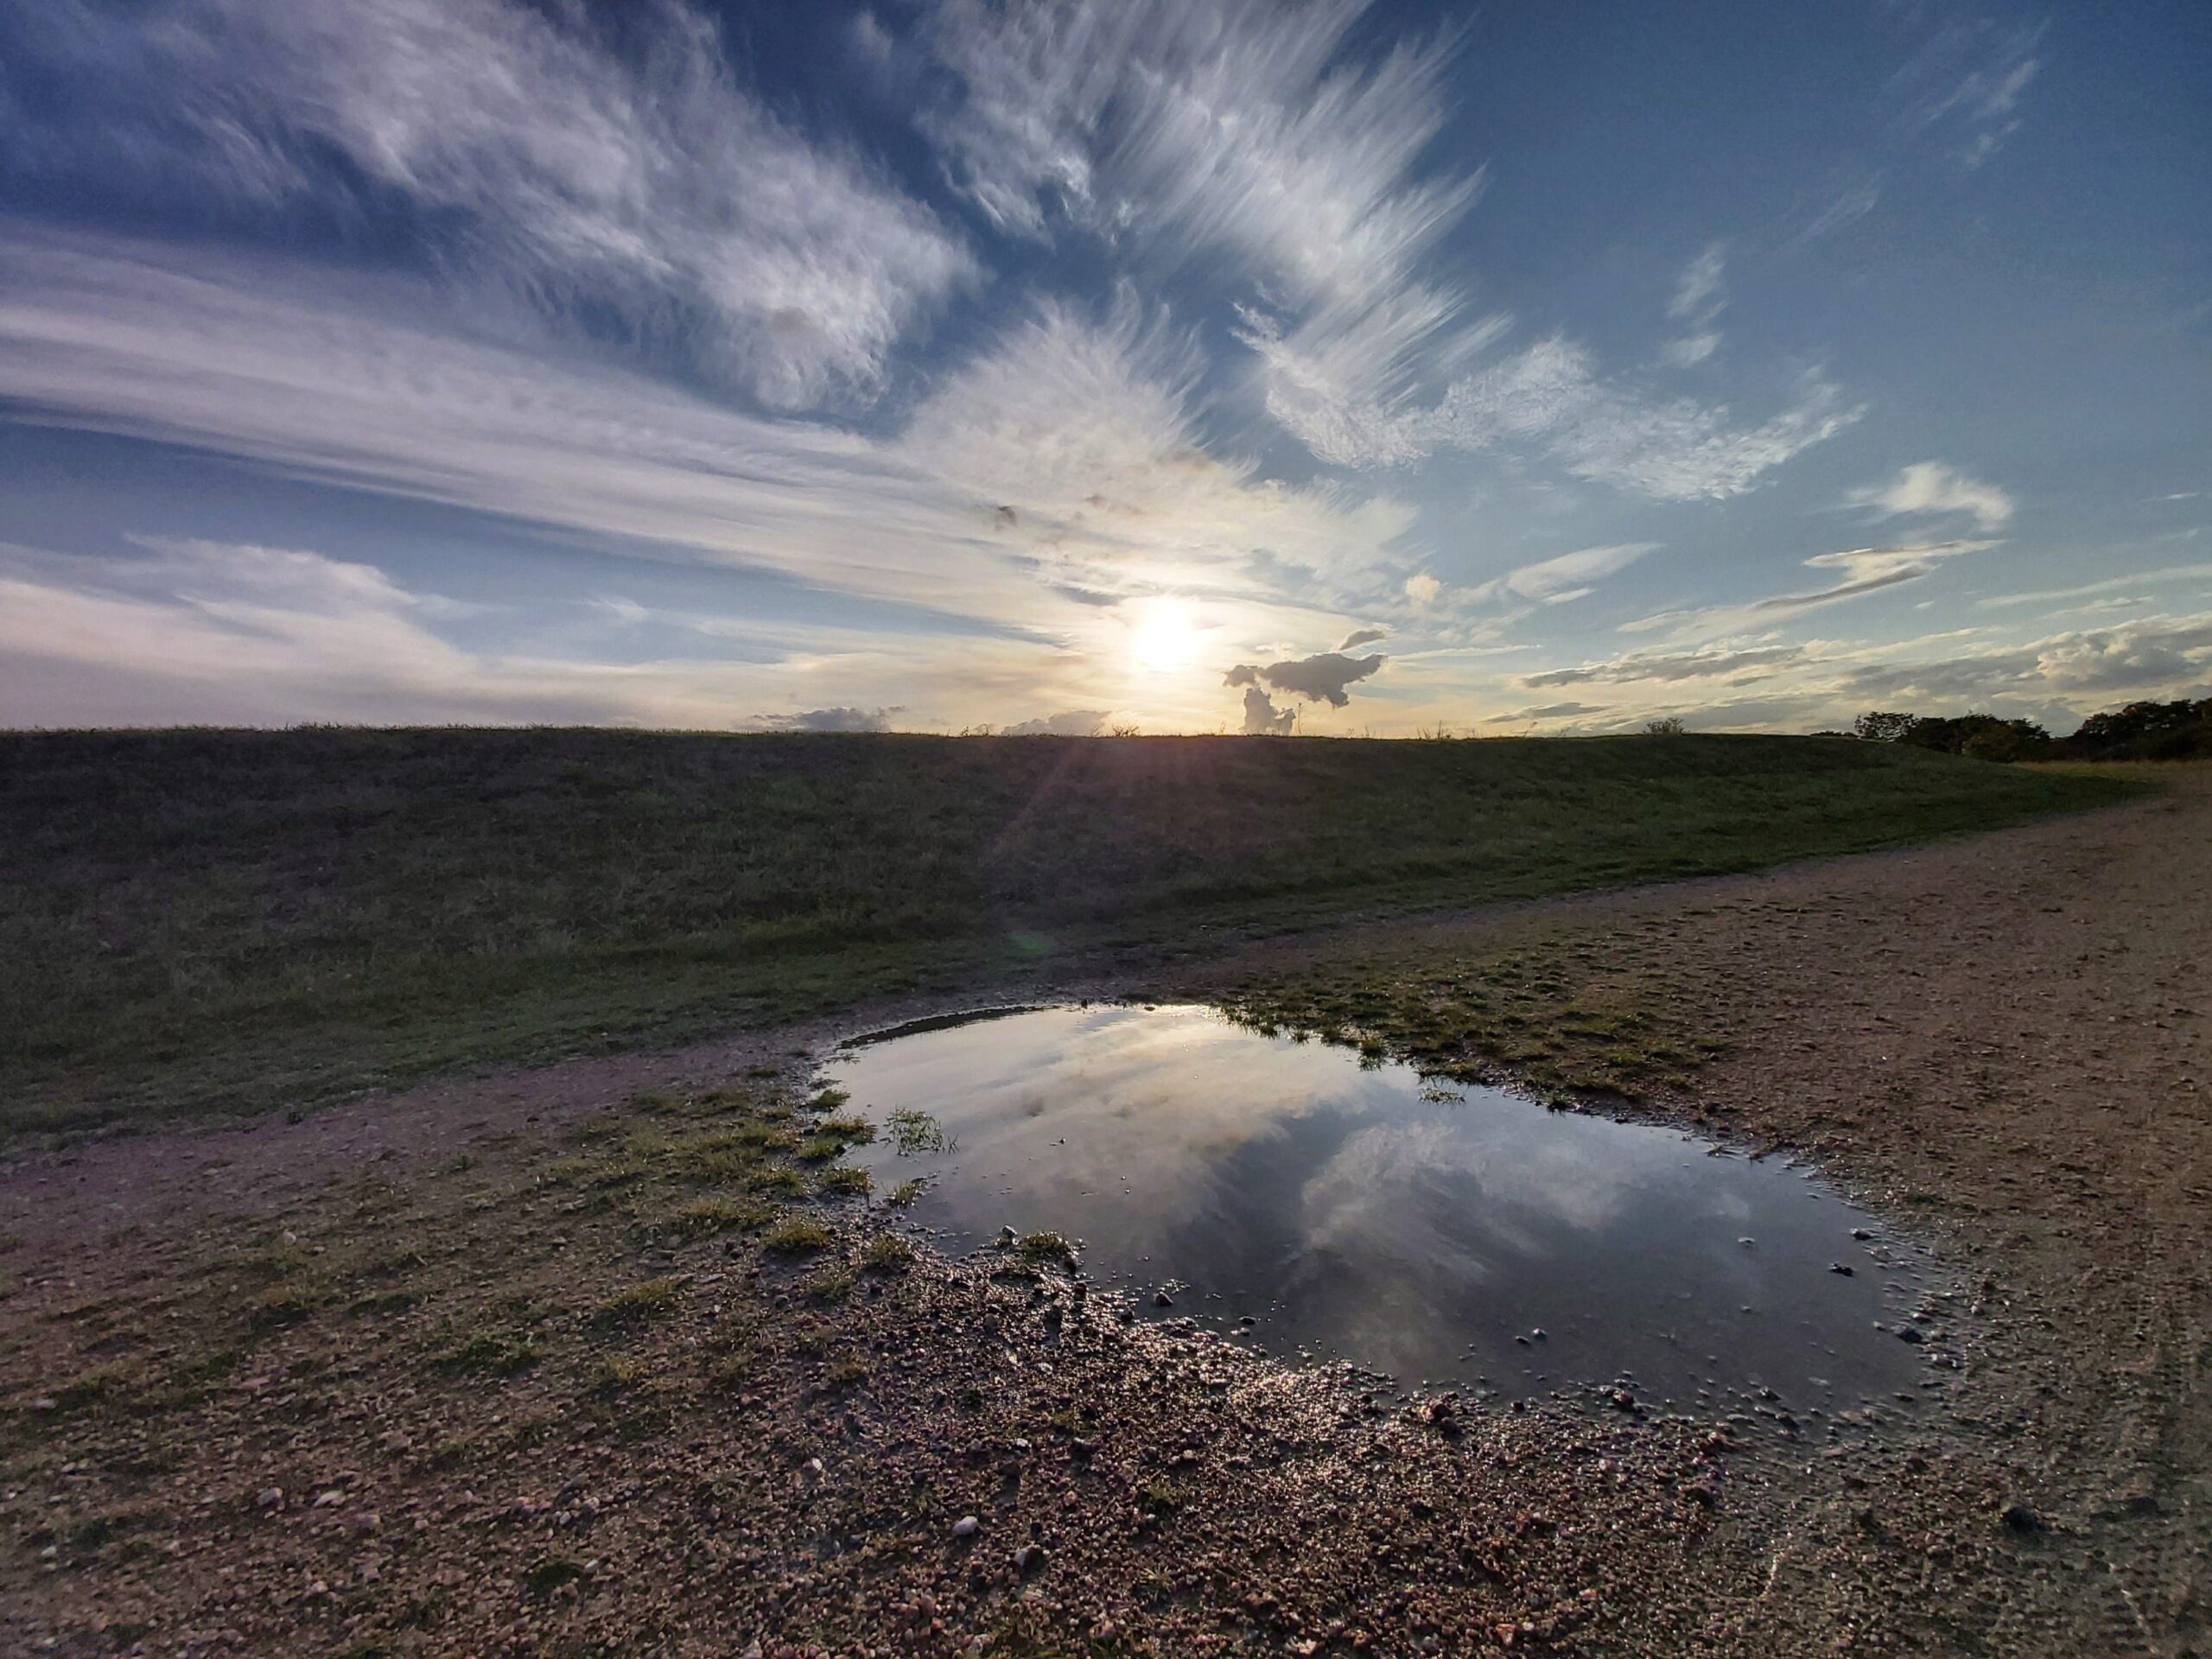 A cloudy reflection in a puddle in Hoo, Medway, England